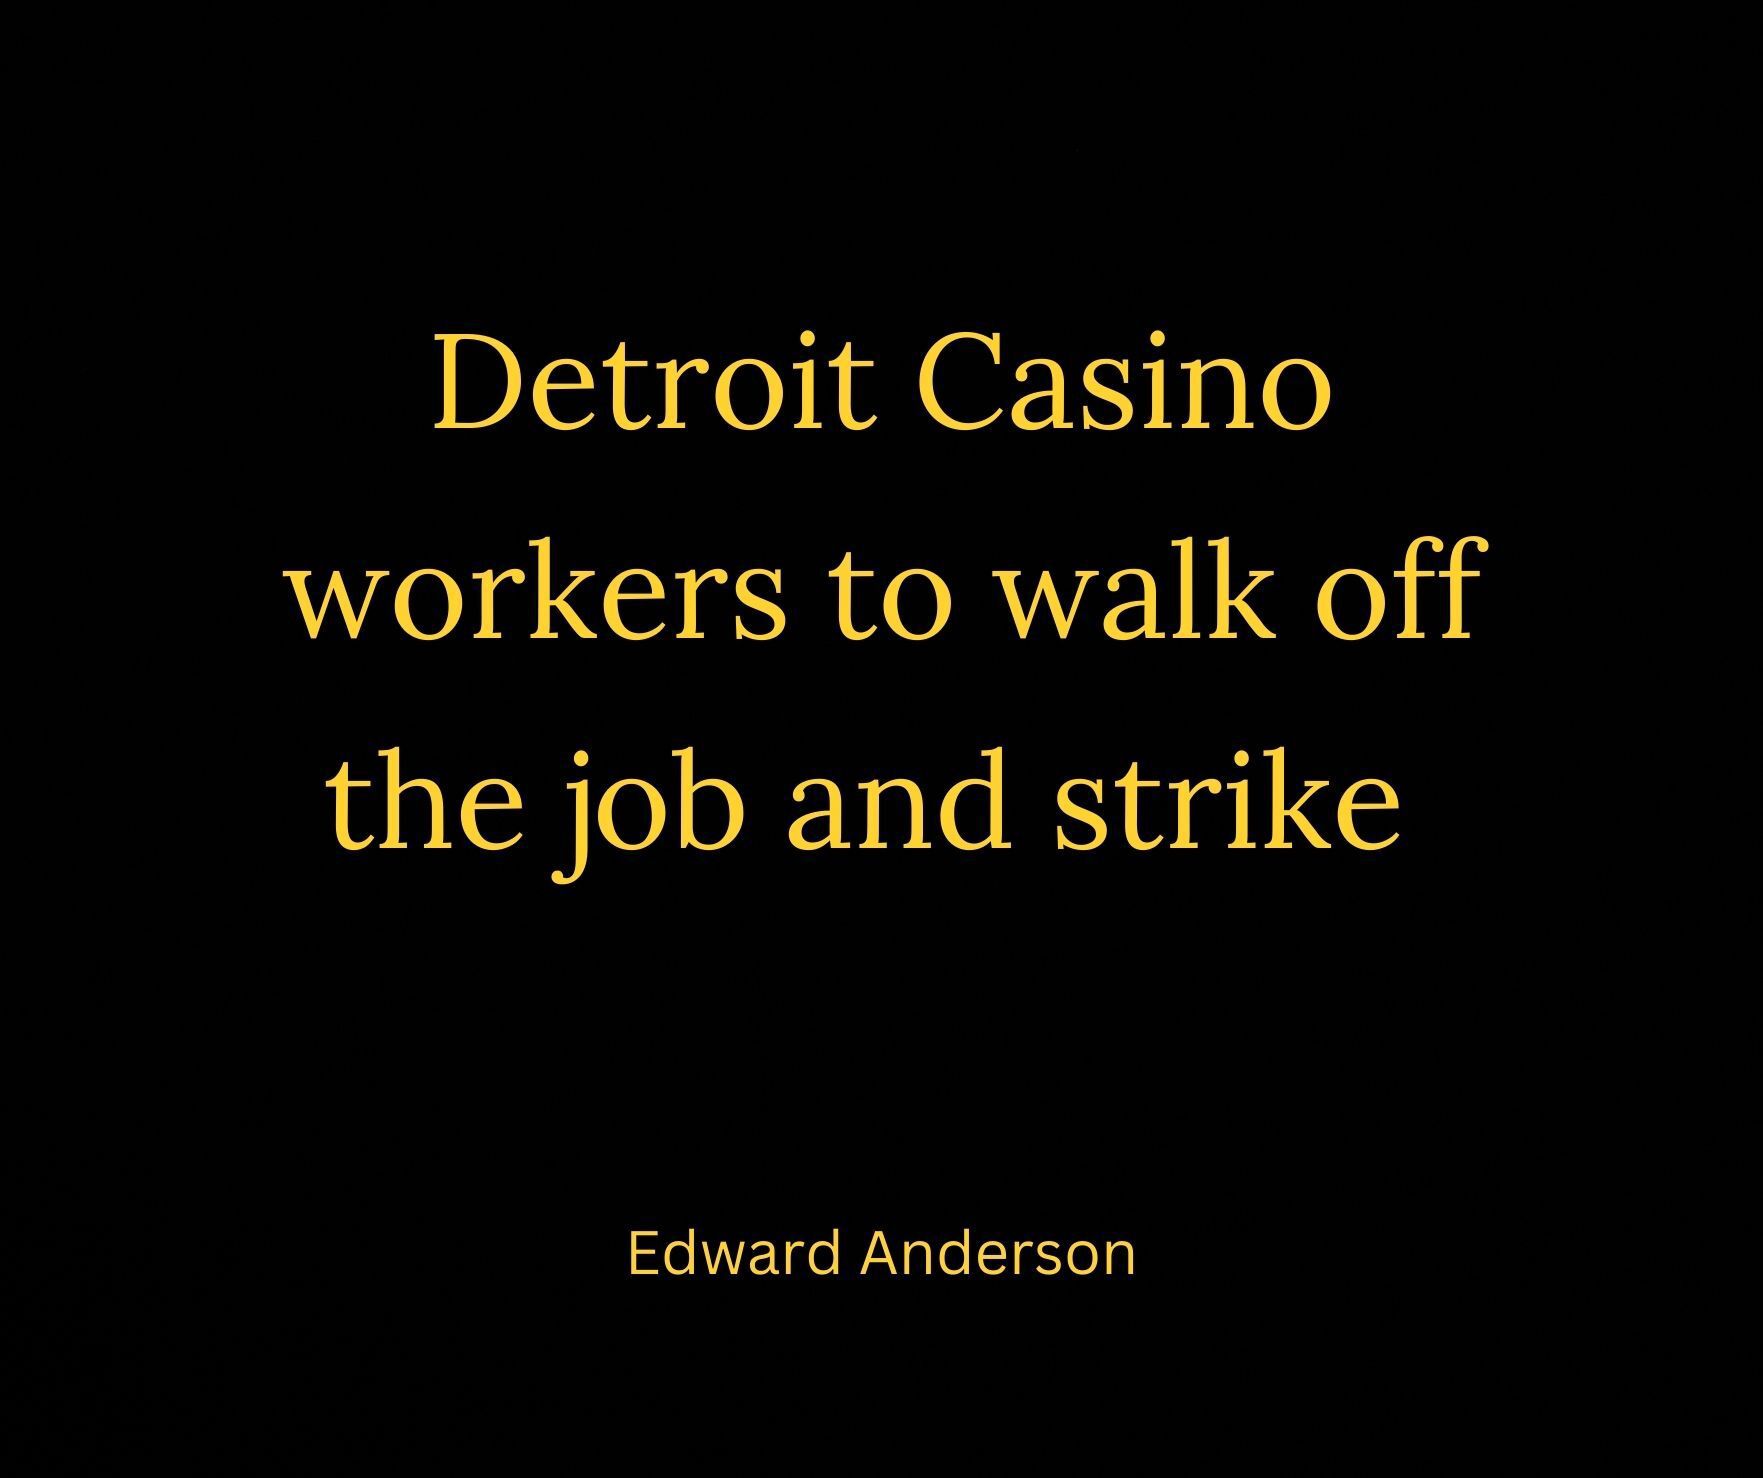 Another Detroit strike